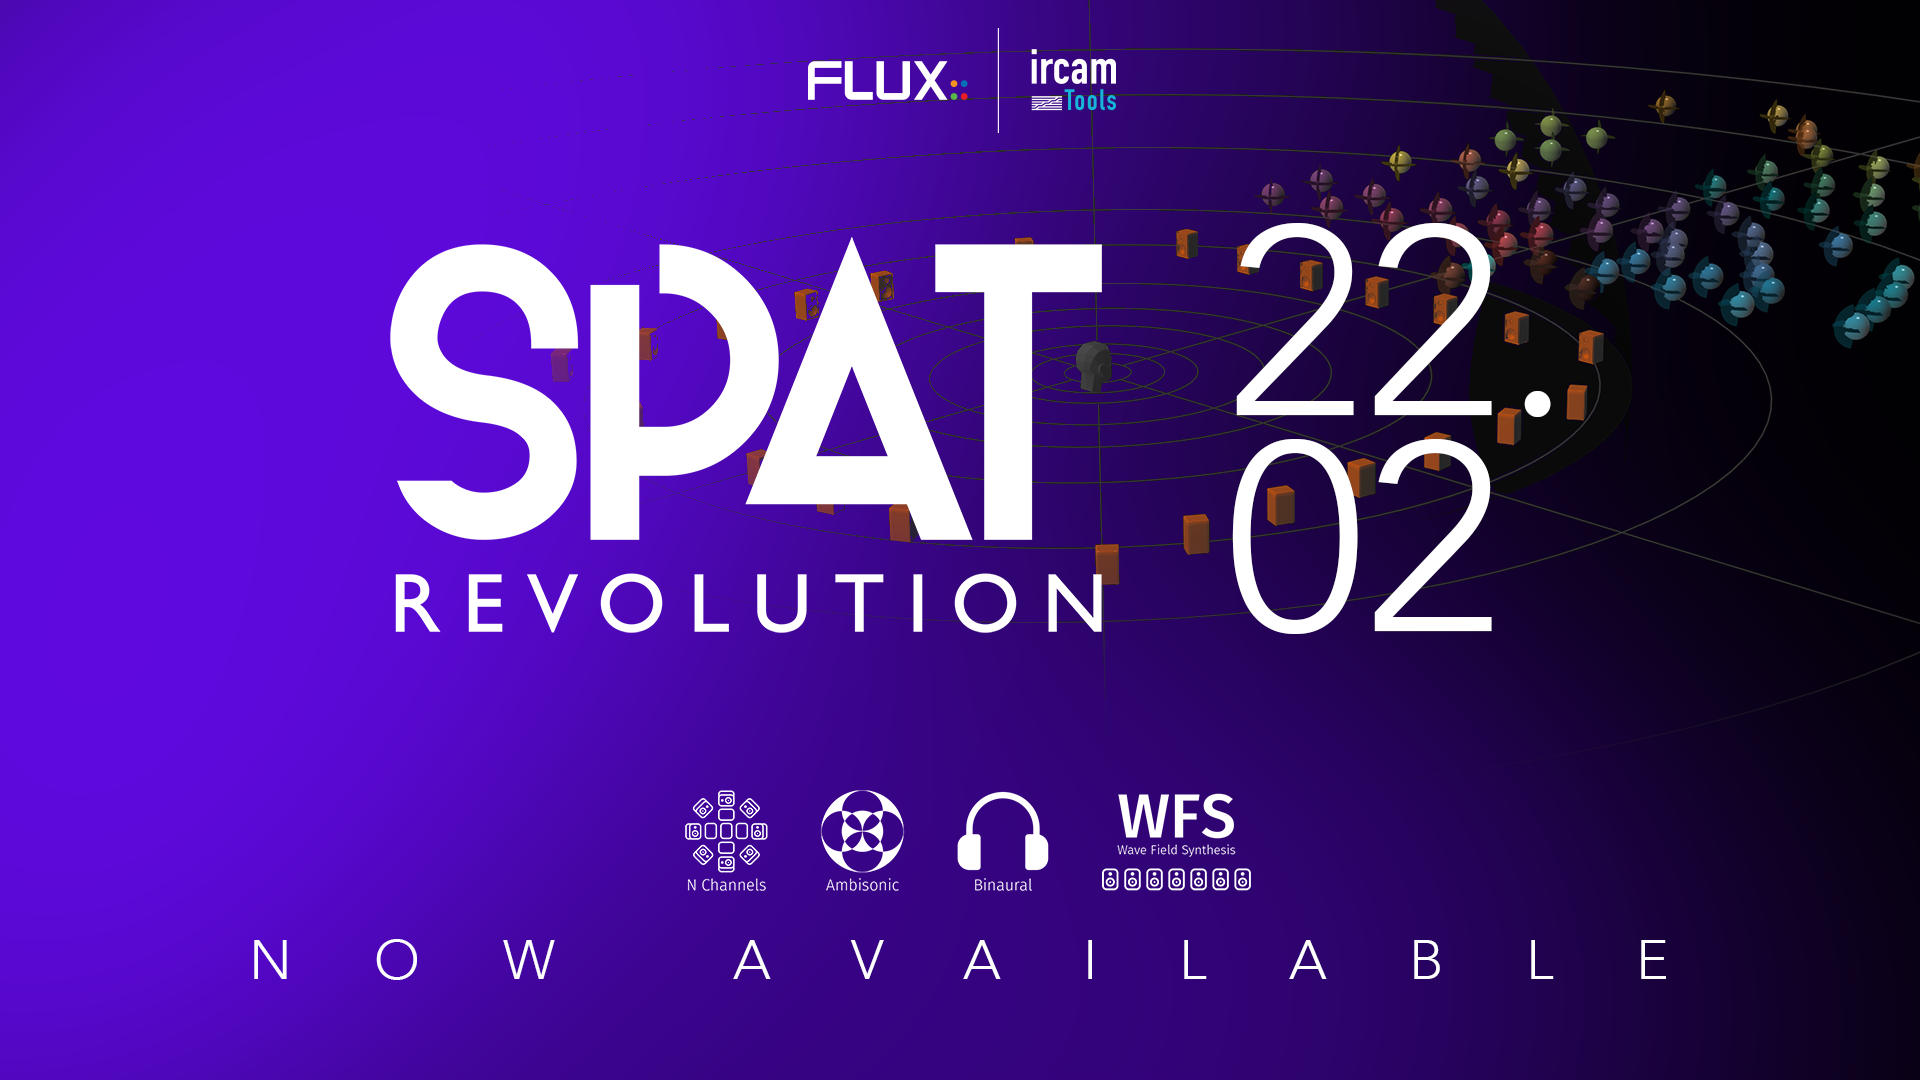 SPAT Revolution 22.02 - Now with WFS!